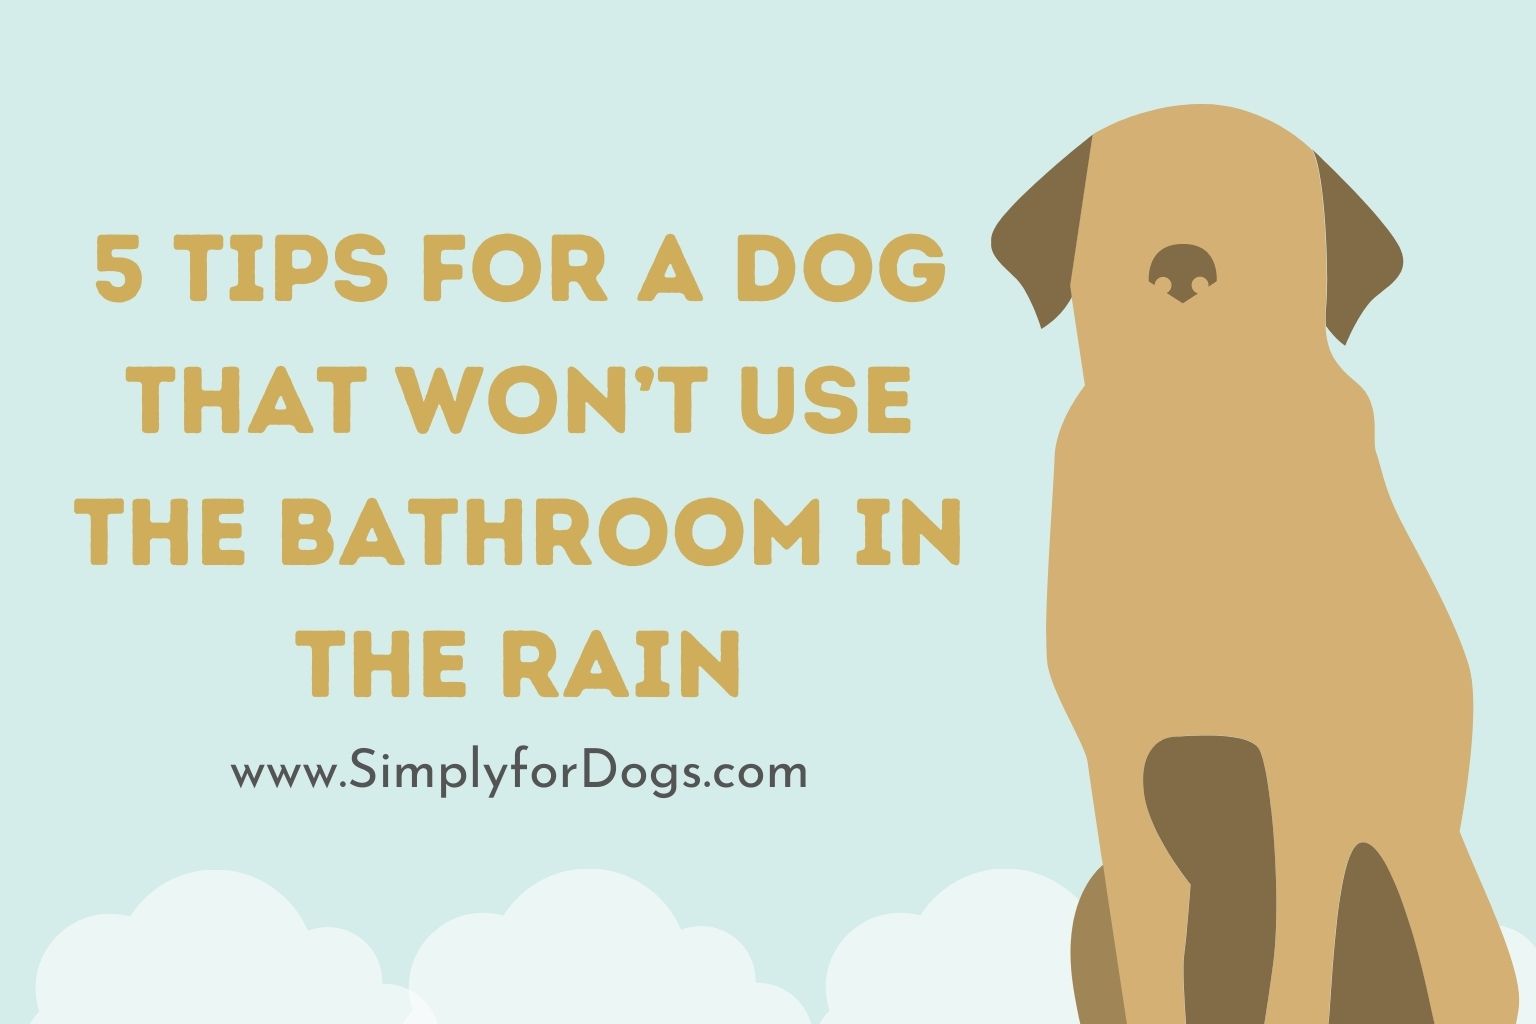 5 Tips for a Dog That Won’t Use the Bathroom in the Rain